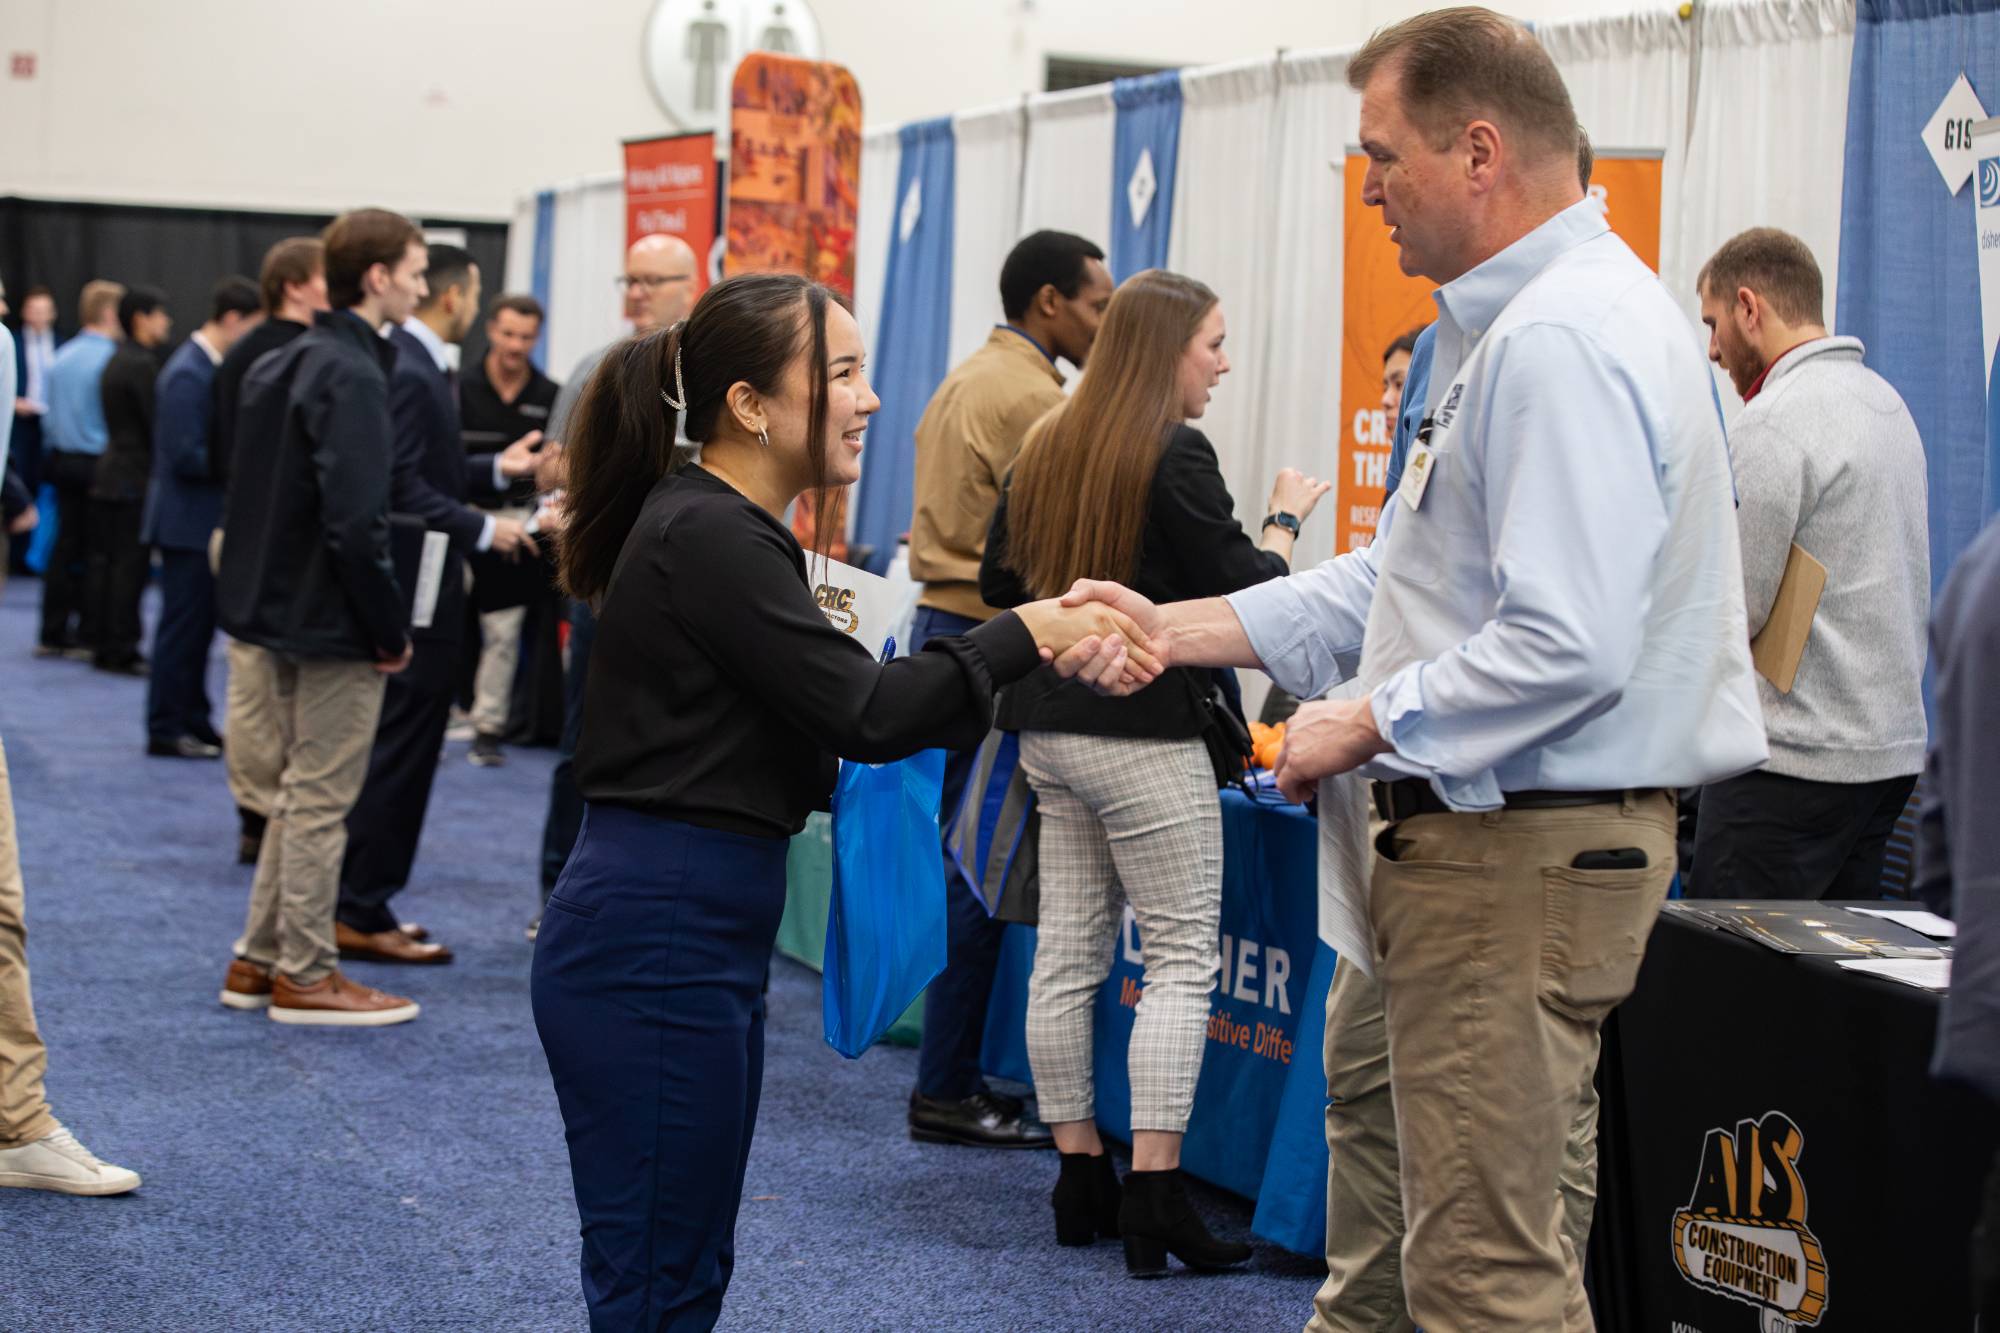 employer and student shaking hands at career fair